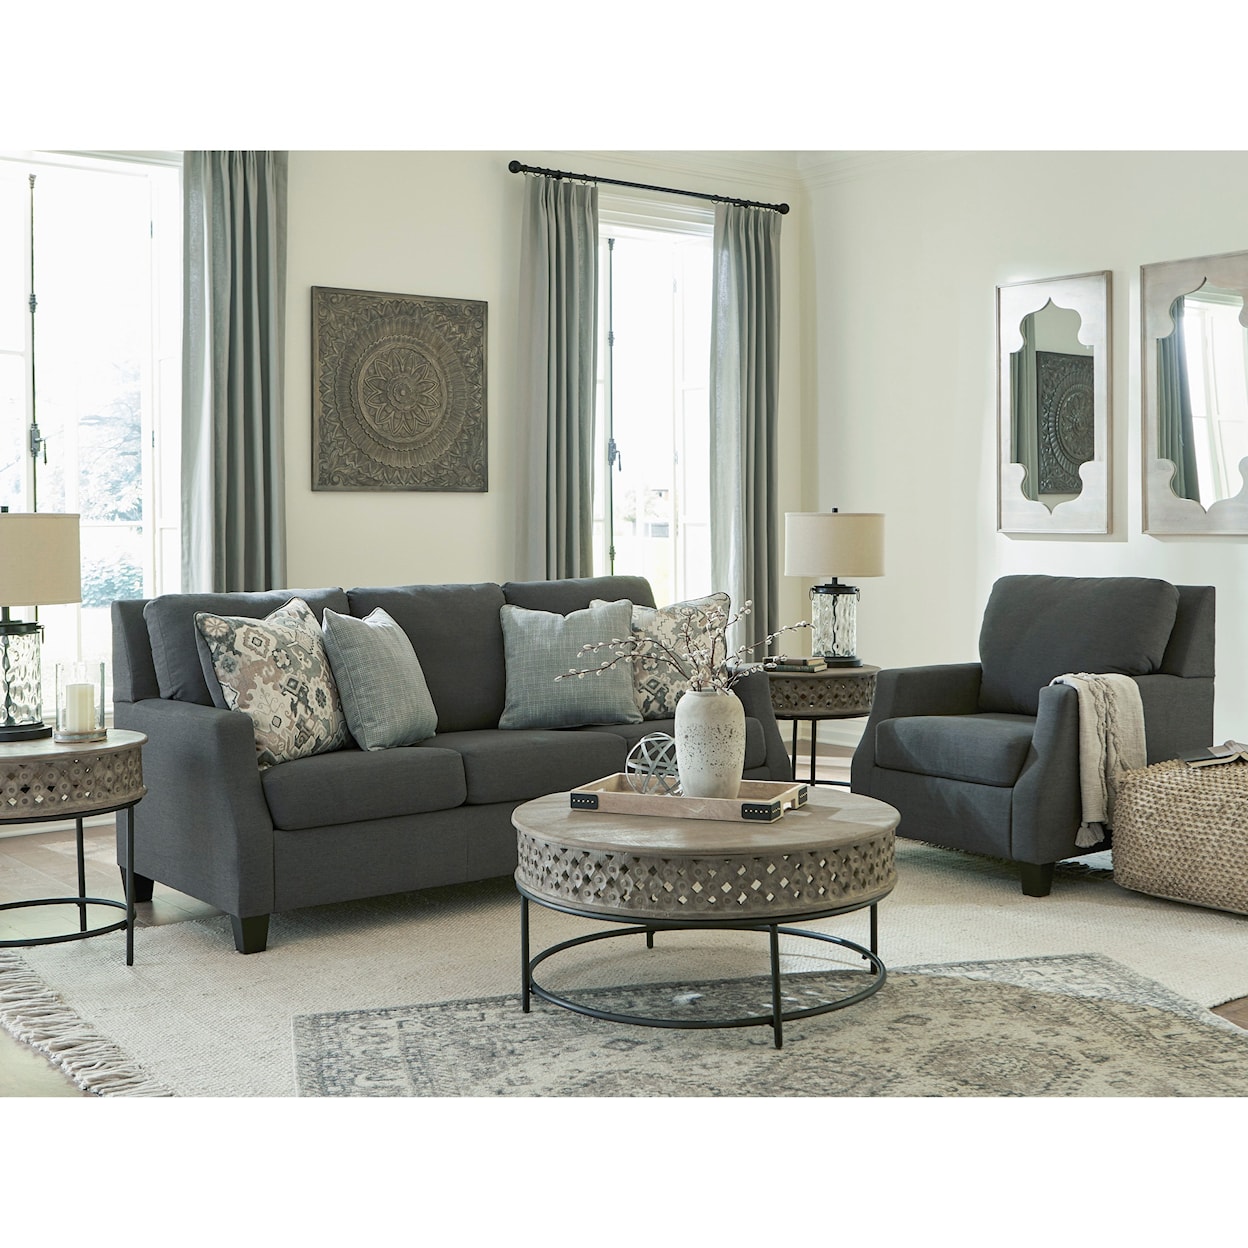 Benchcraft Bayonne Living Room Group